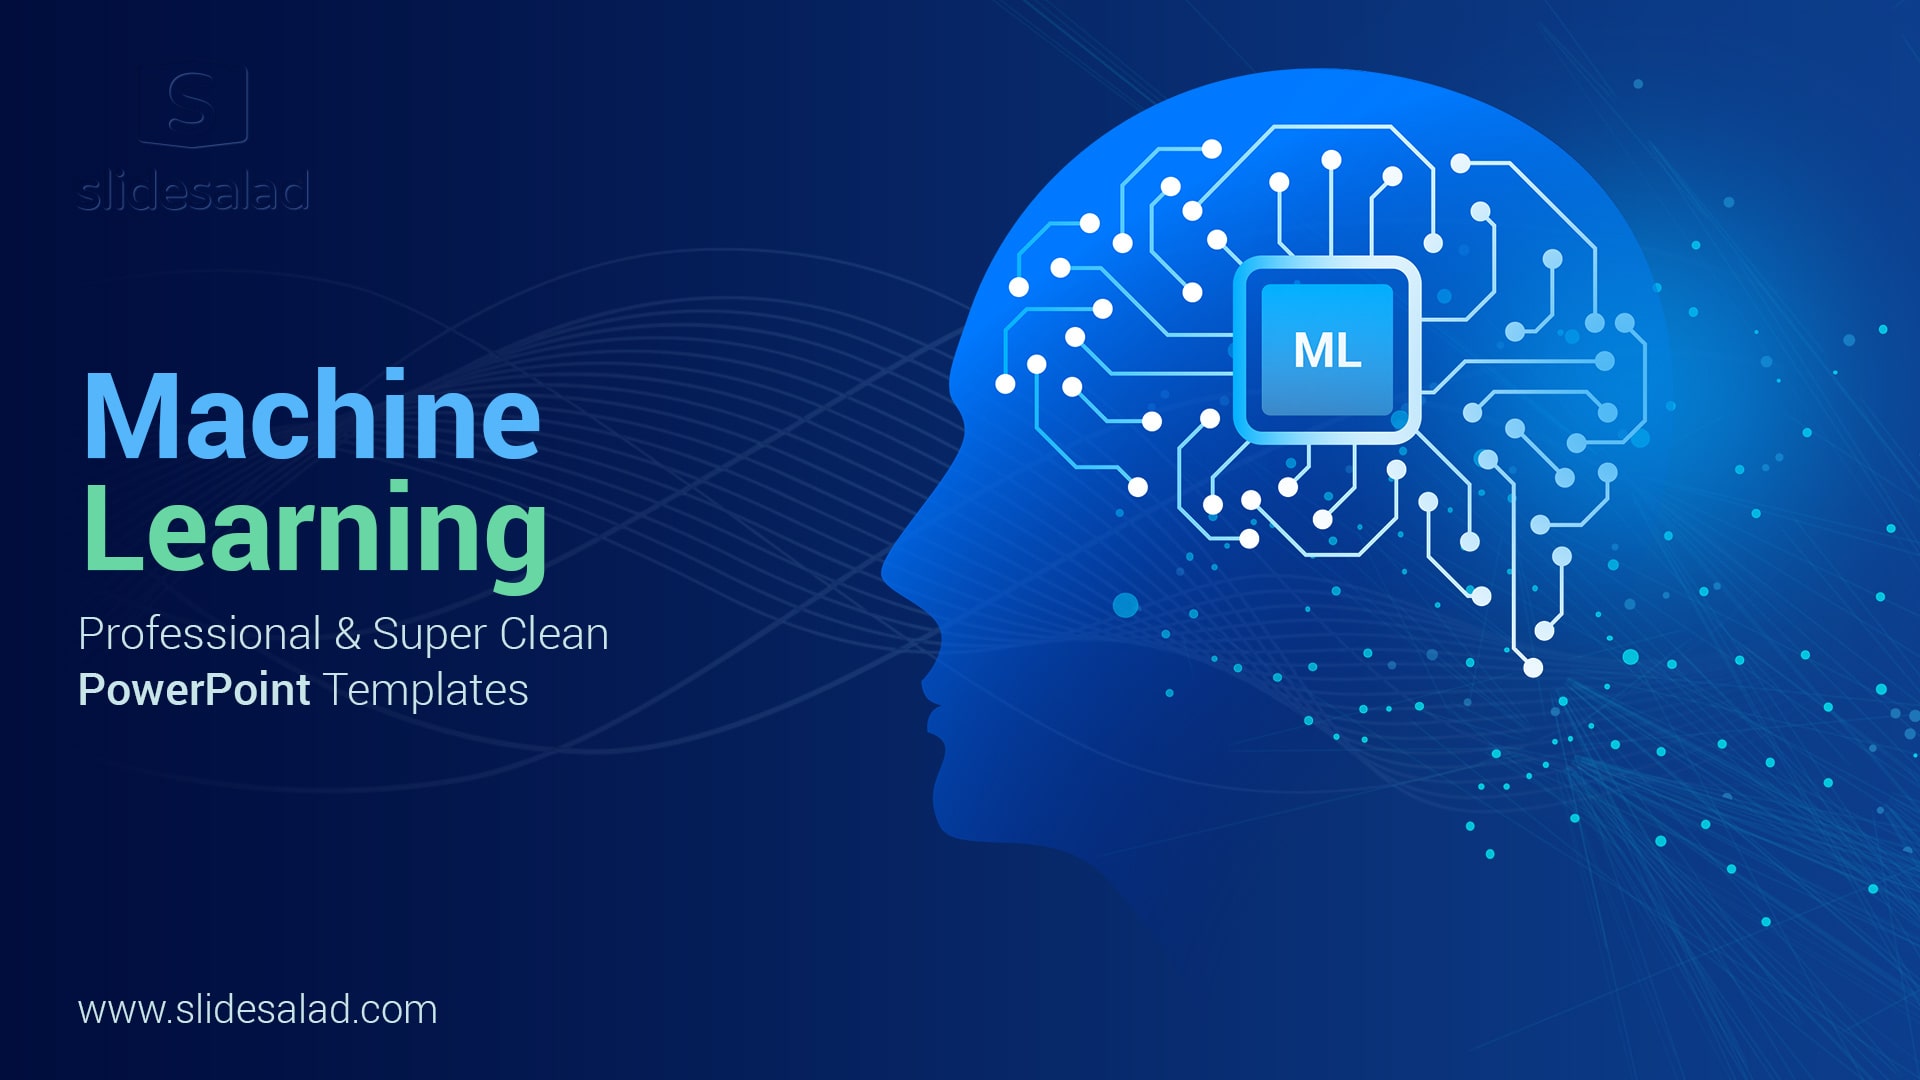 Machine Learning PowerPoint Template Designs - Learn Automatically from the Past Data using Machine Learning